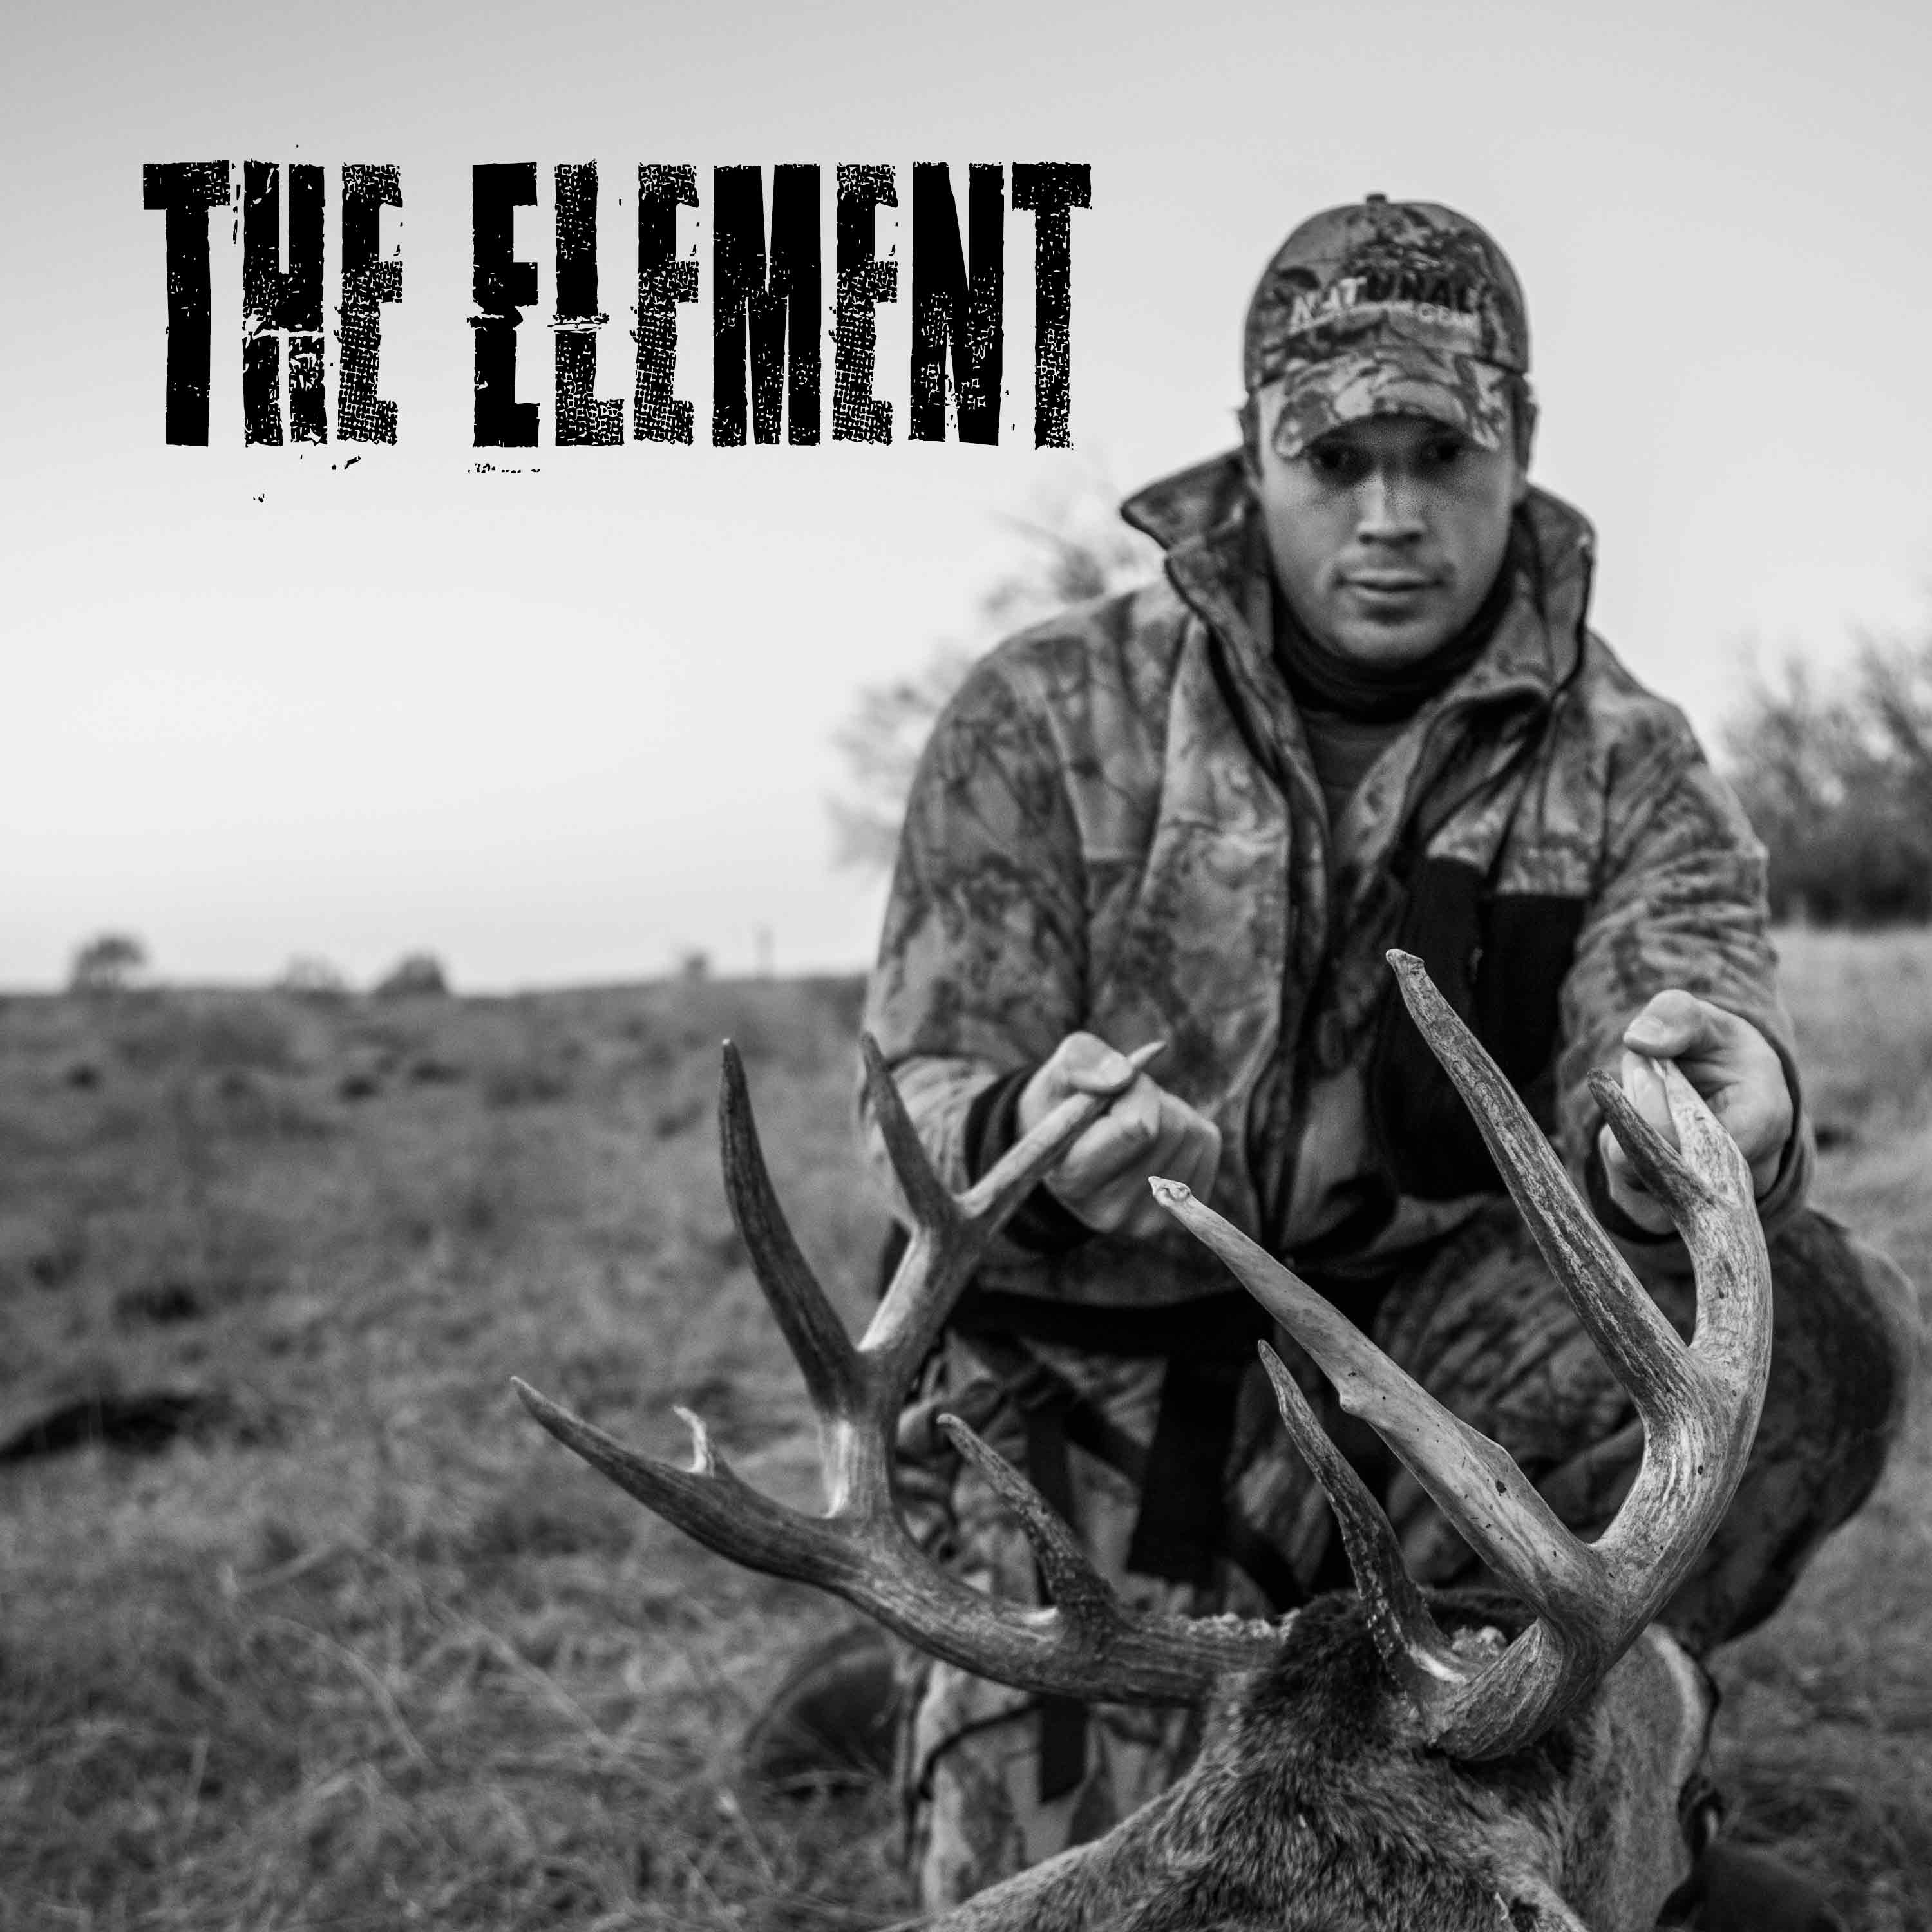 E206: Texas Legends (feat. Mick Hellickson, Deer Biologist and Former KING RANCH Head Biologist on Whitetail Quail and Nilgai Management, Years With Trail Cameras, Biggest Bucks, Texas Hunting)